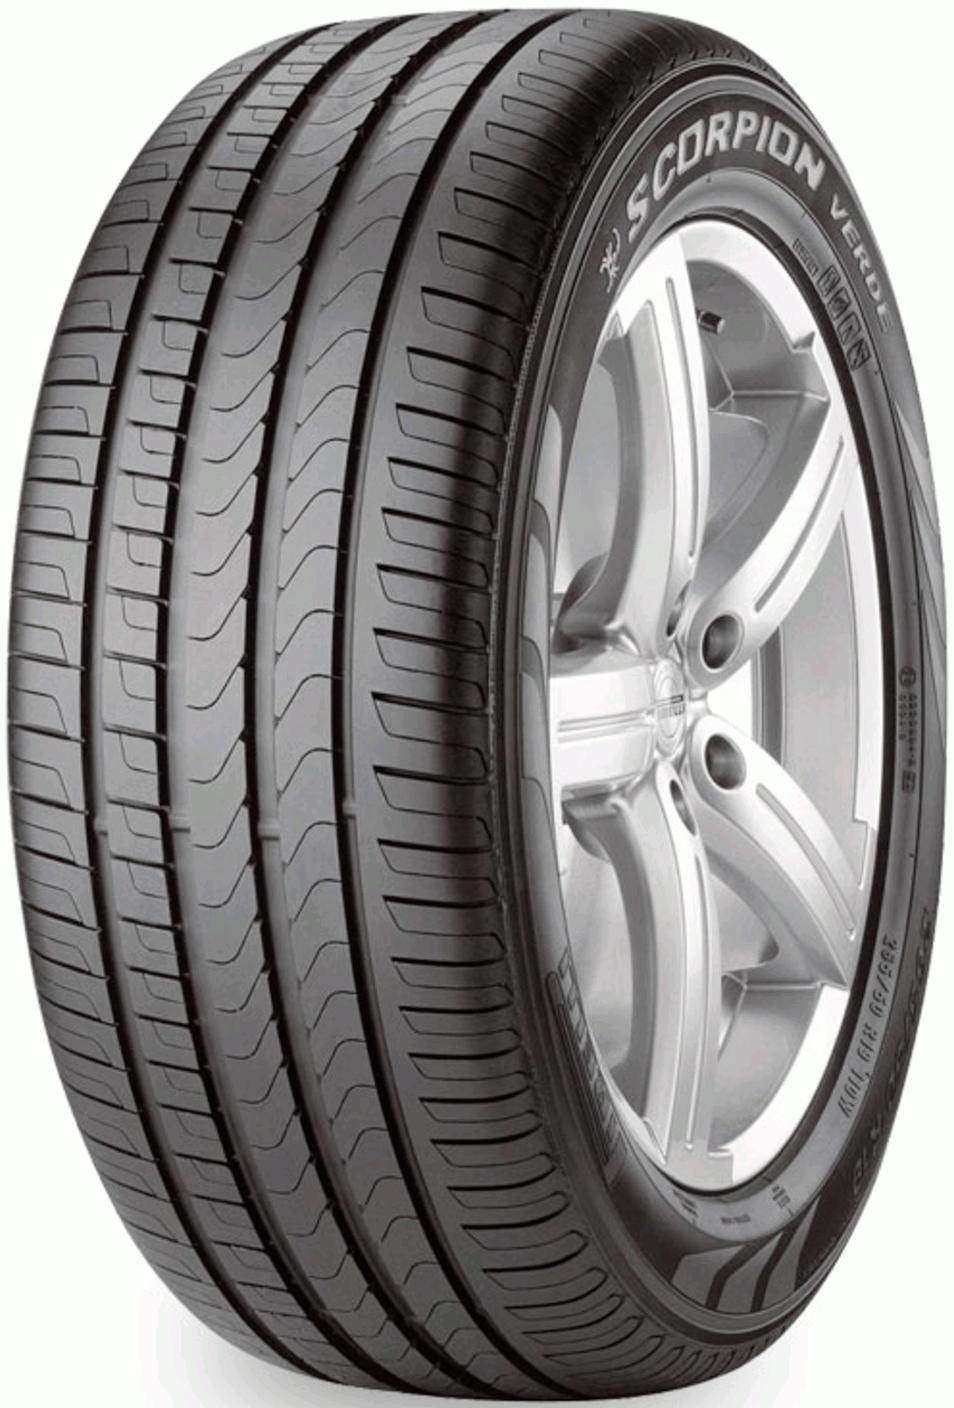 All Weather Tire 255/60/R18 112V C/B/75 Cooper Zeon 4XS Sport 